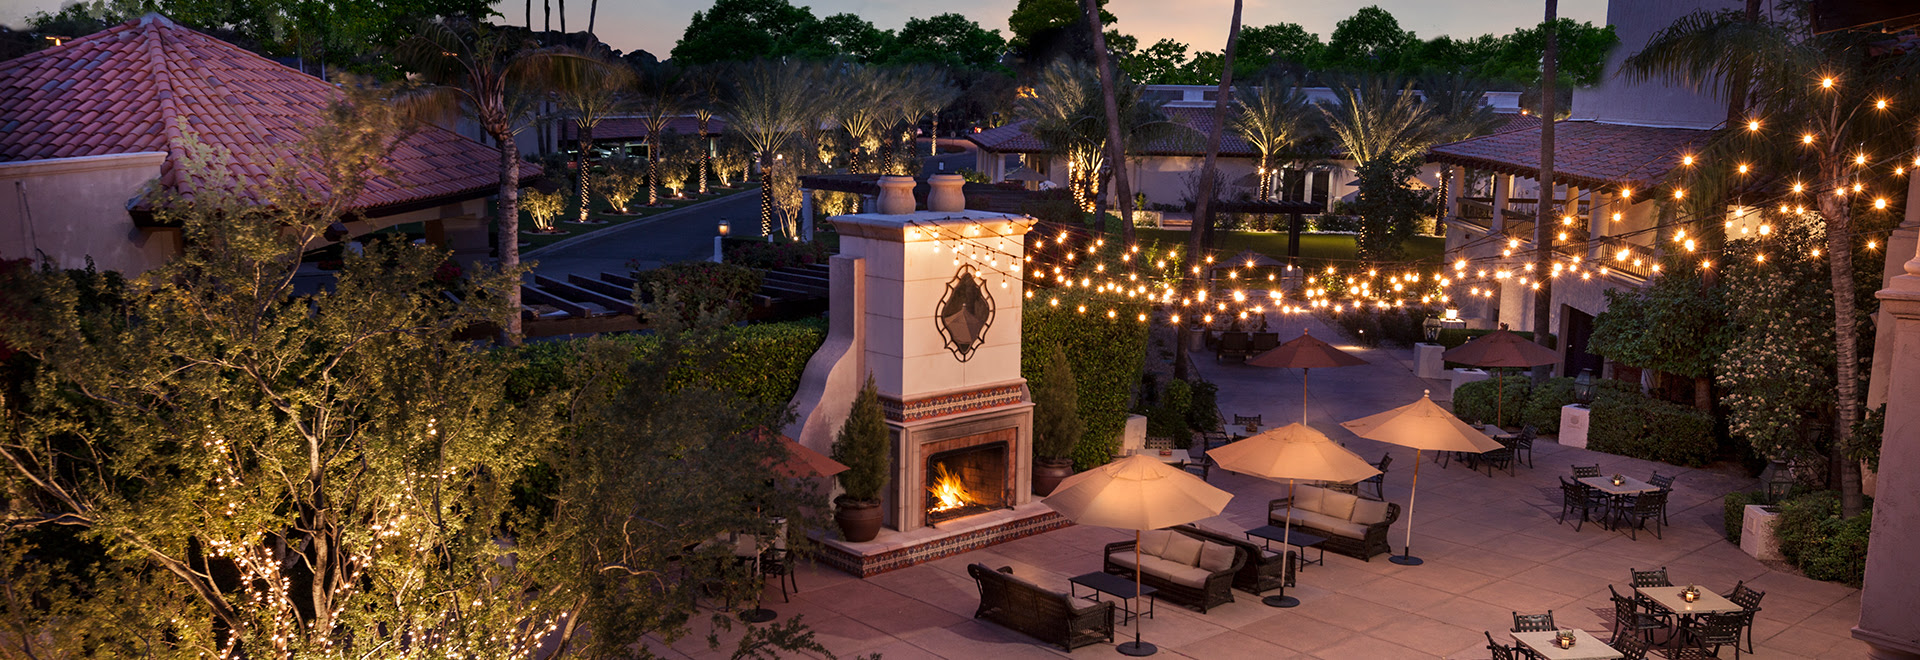 Discount 60 Off The Mccormick Scottsdale United States B b Hotel 